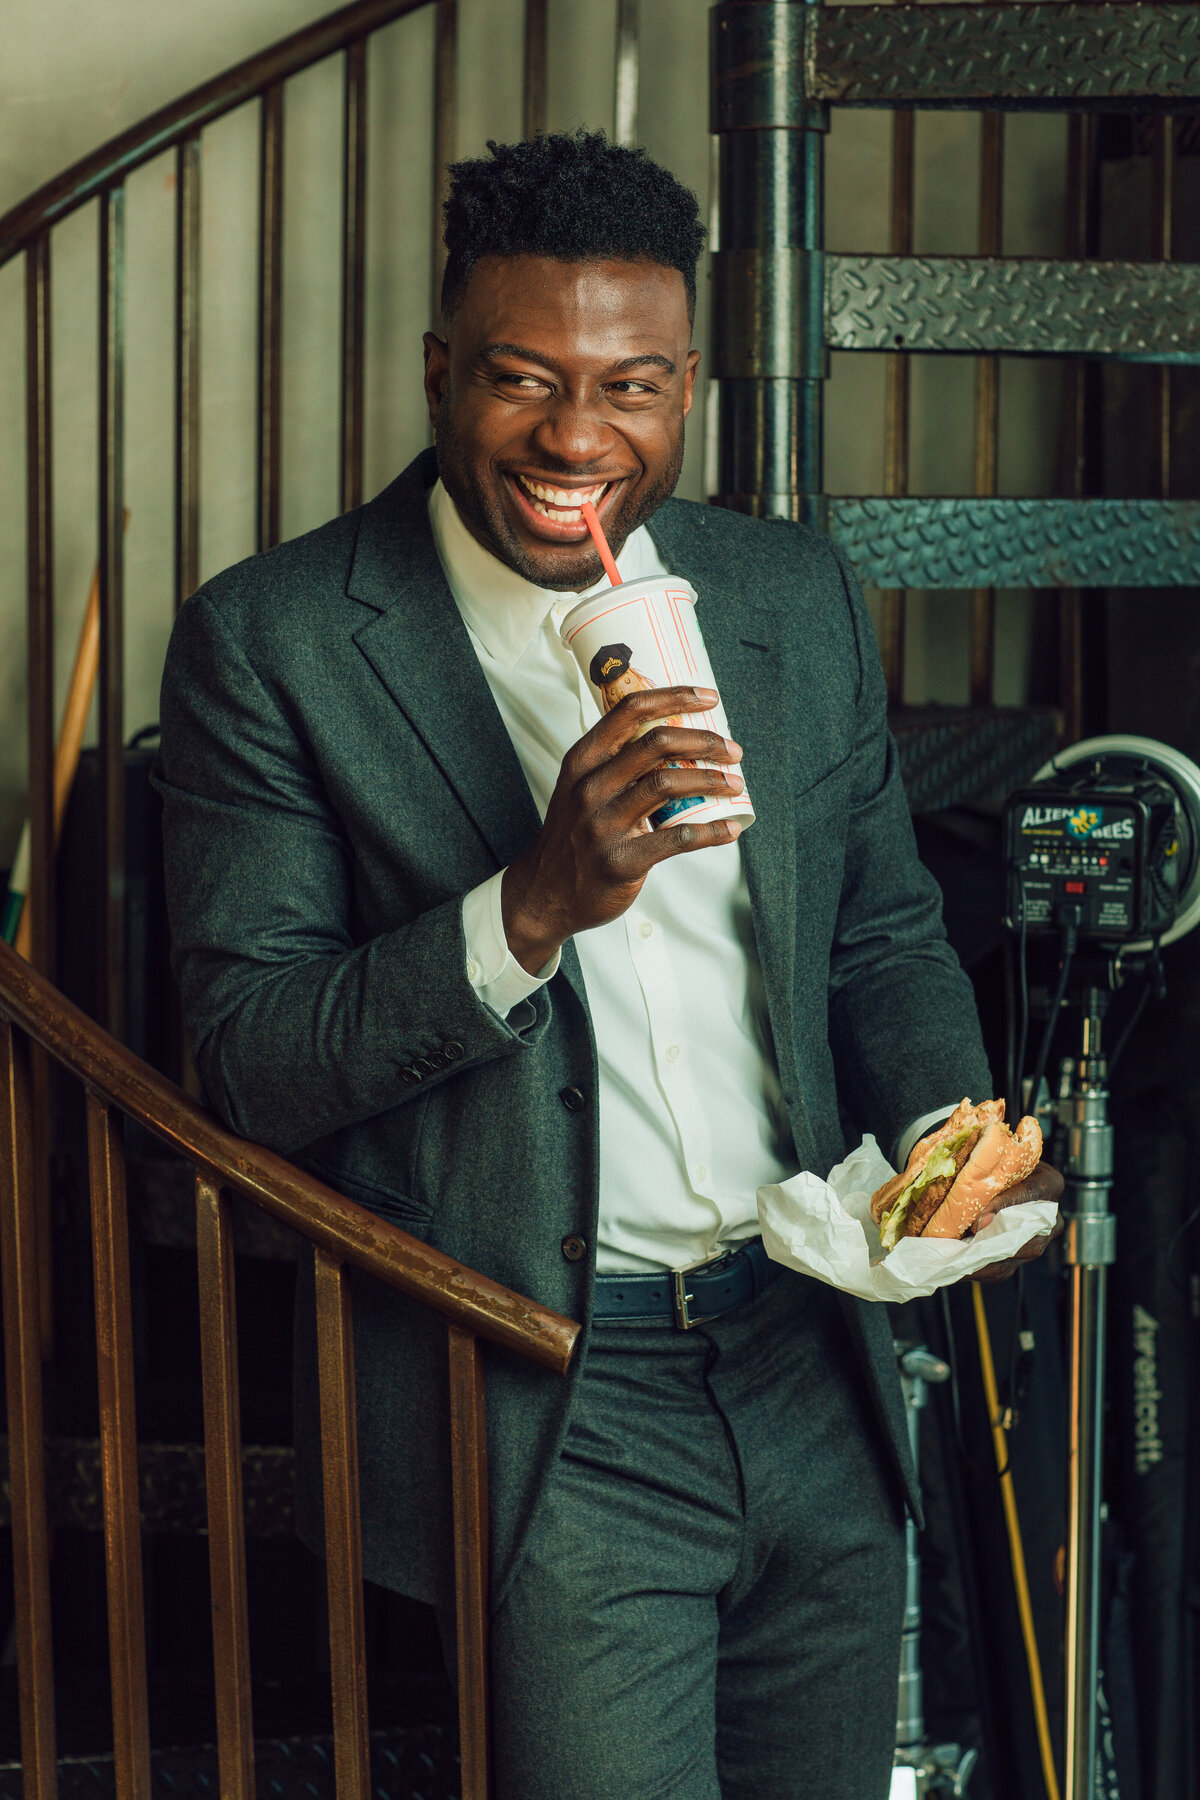 Portrait Photo Of Young Black Man In Suit Laughing While Sipping a Drink Los Angeles